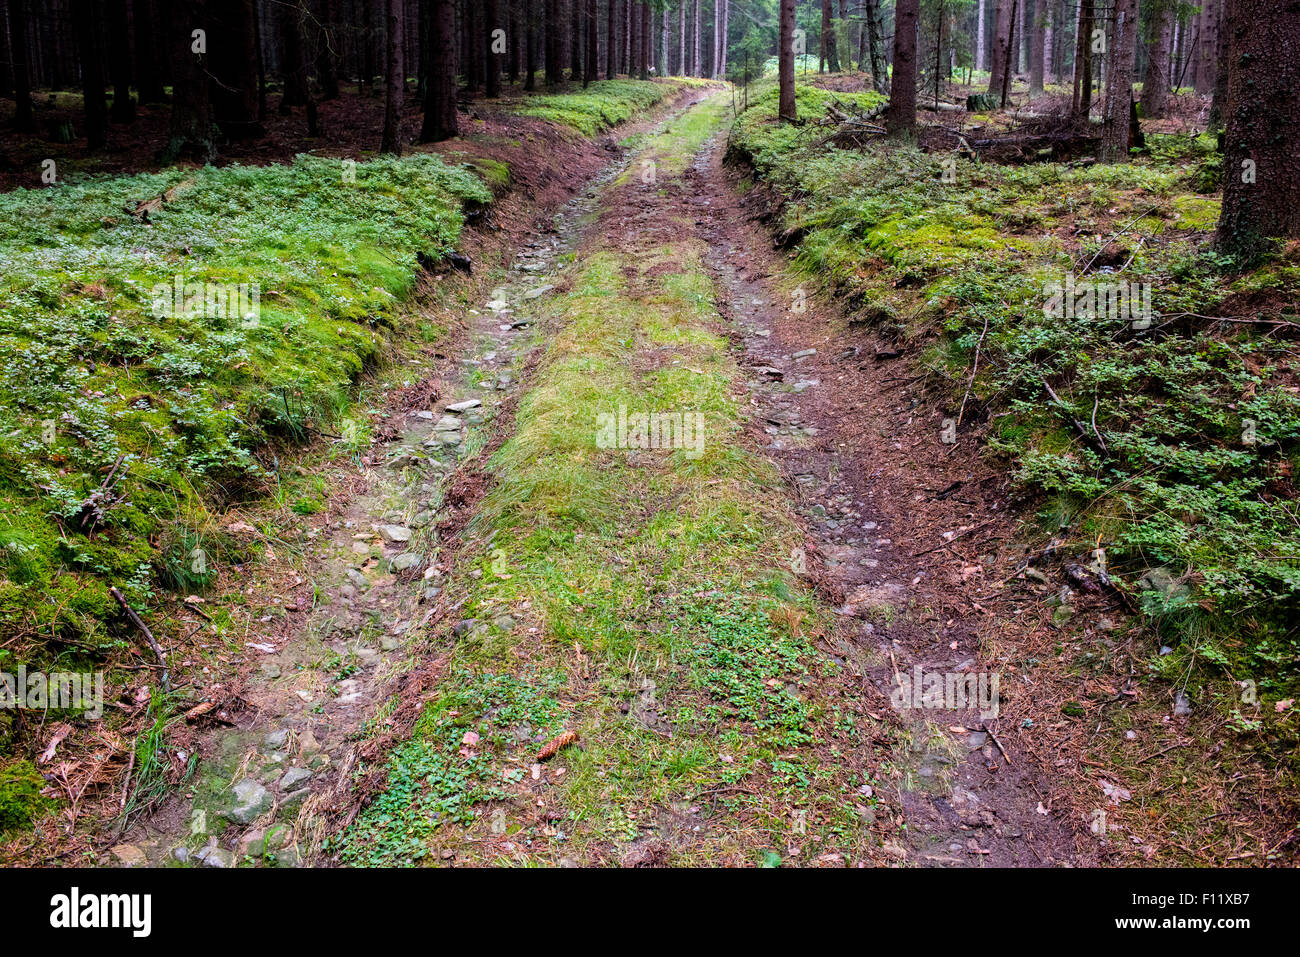 dirt road running through a forest Stock Photo